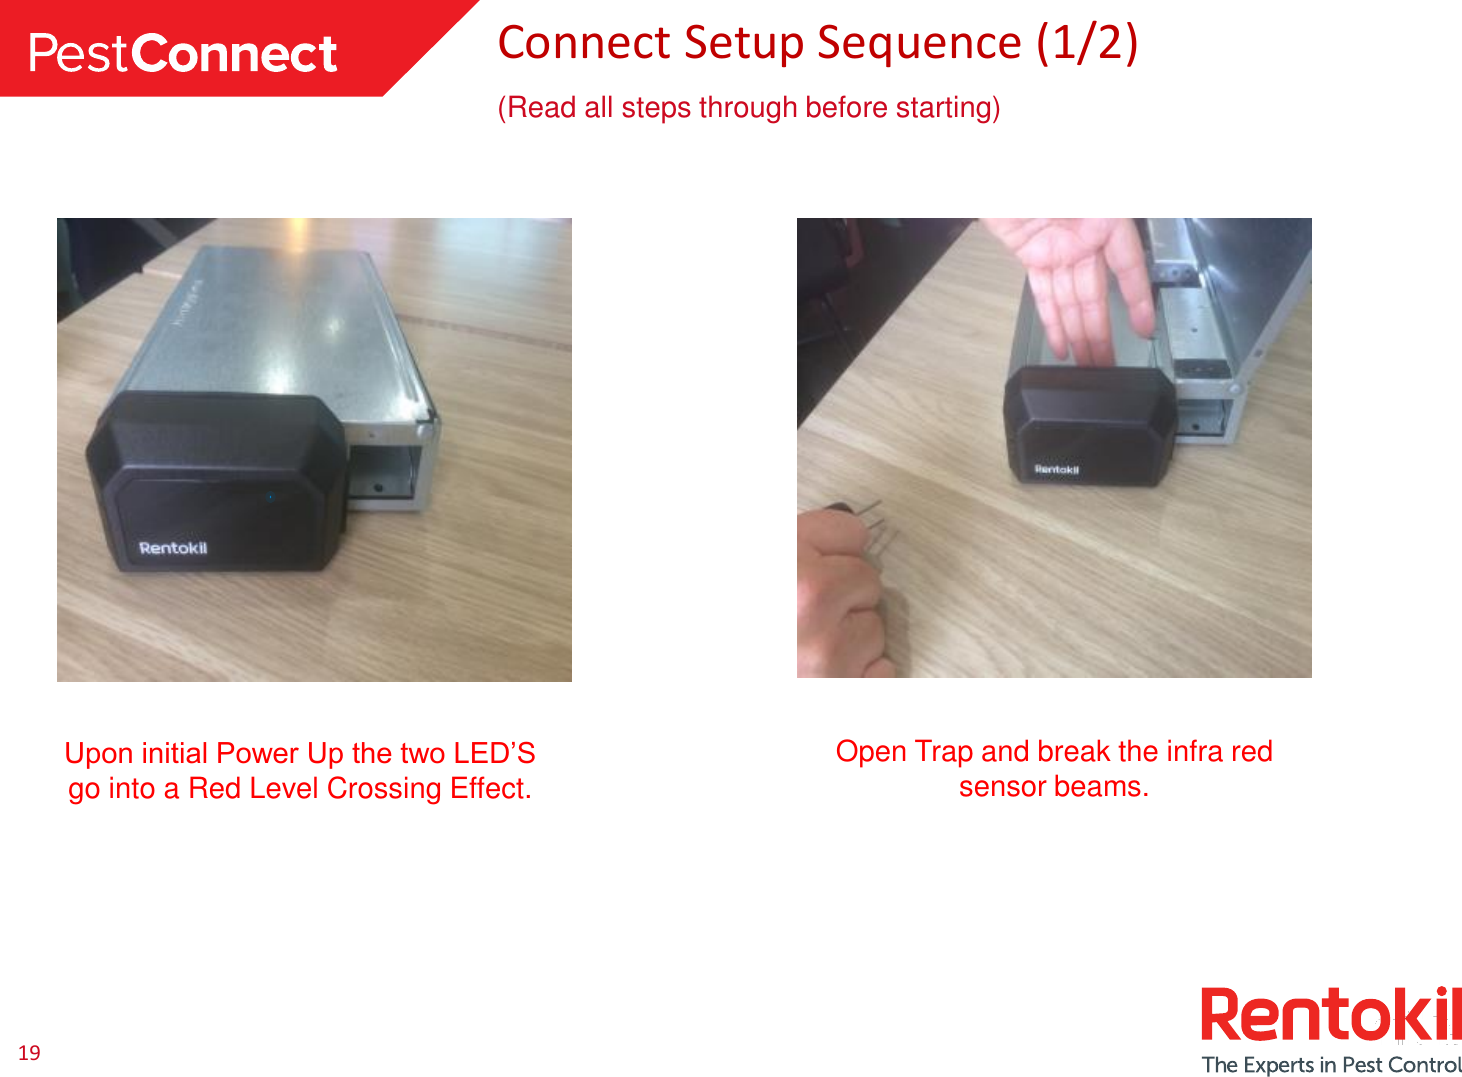 19Connect Setup Sequence (1/2)(Read all steps through before starting)Upon initial Power Up the two LED’S go into a Red Level Crossing Effect.Open Trap and break the infra red sensor beams. 